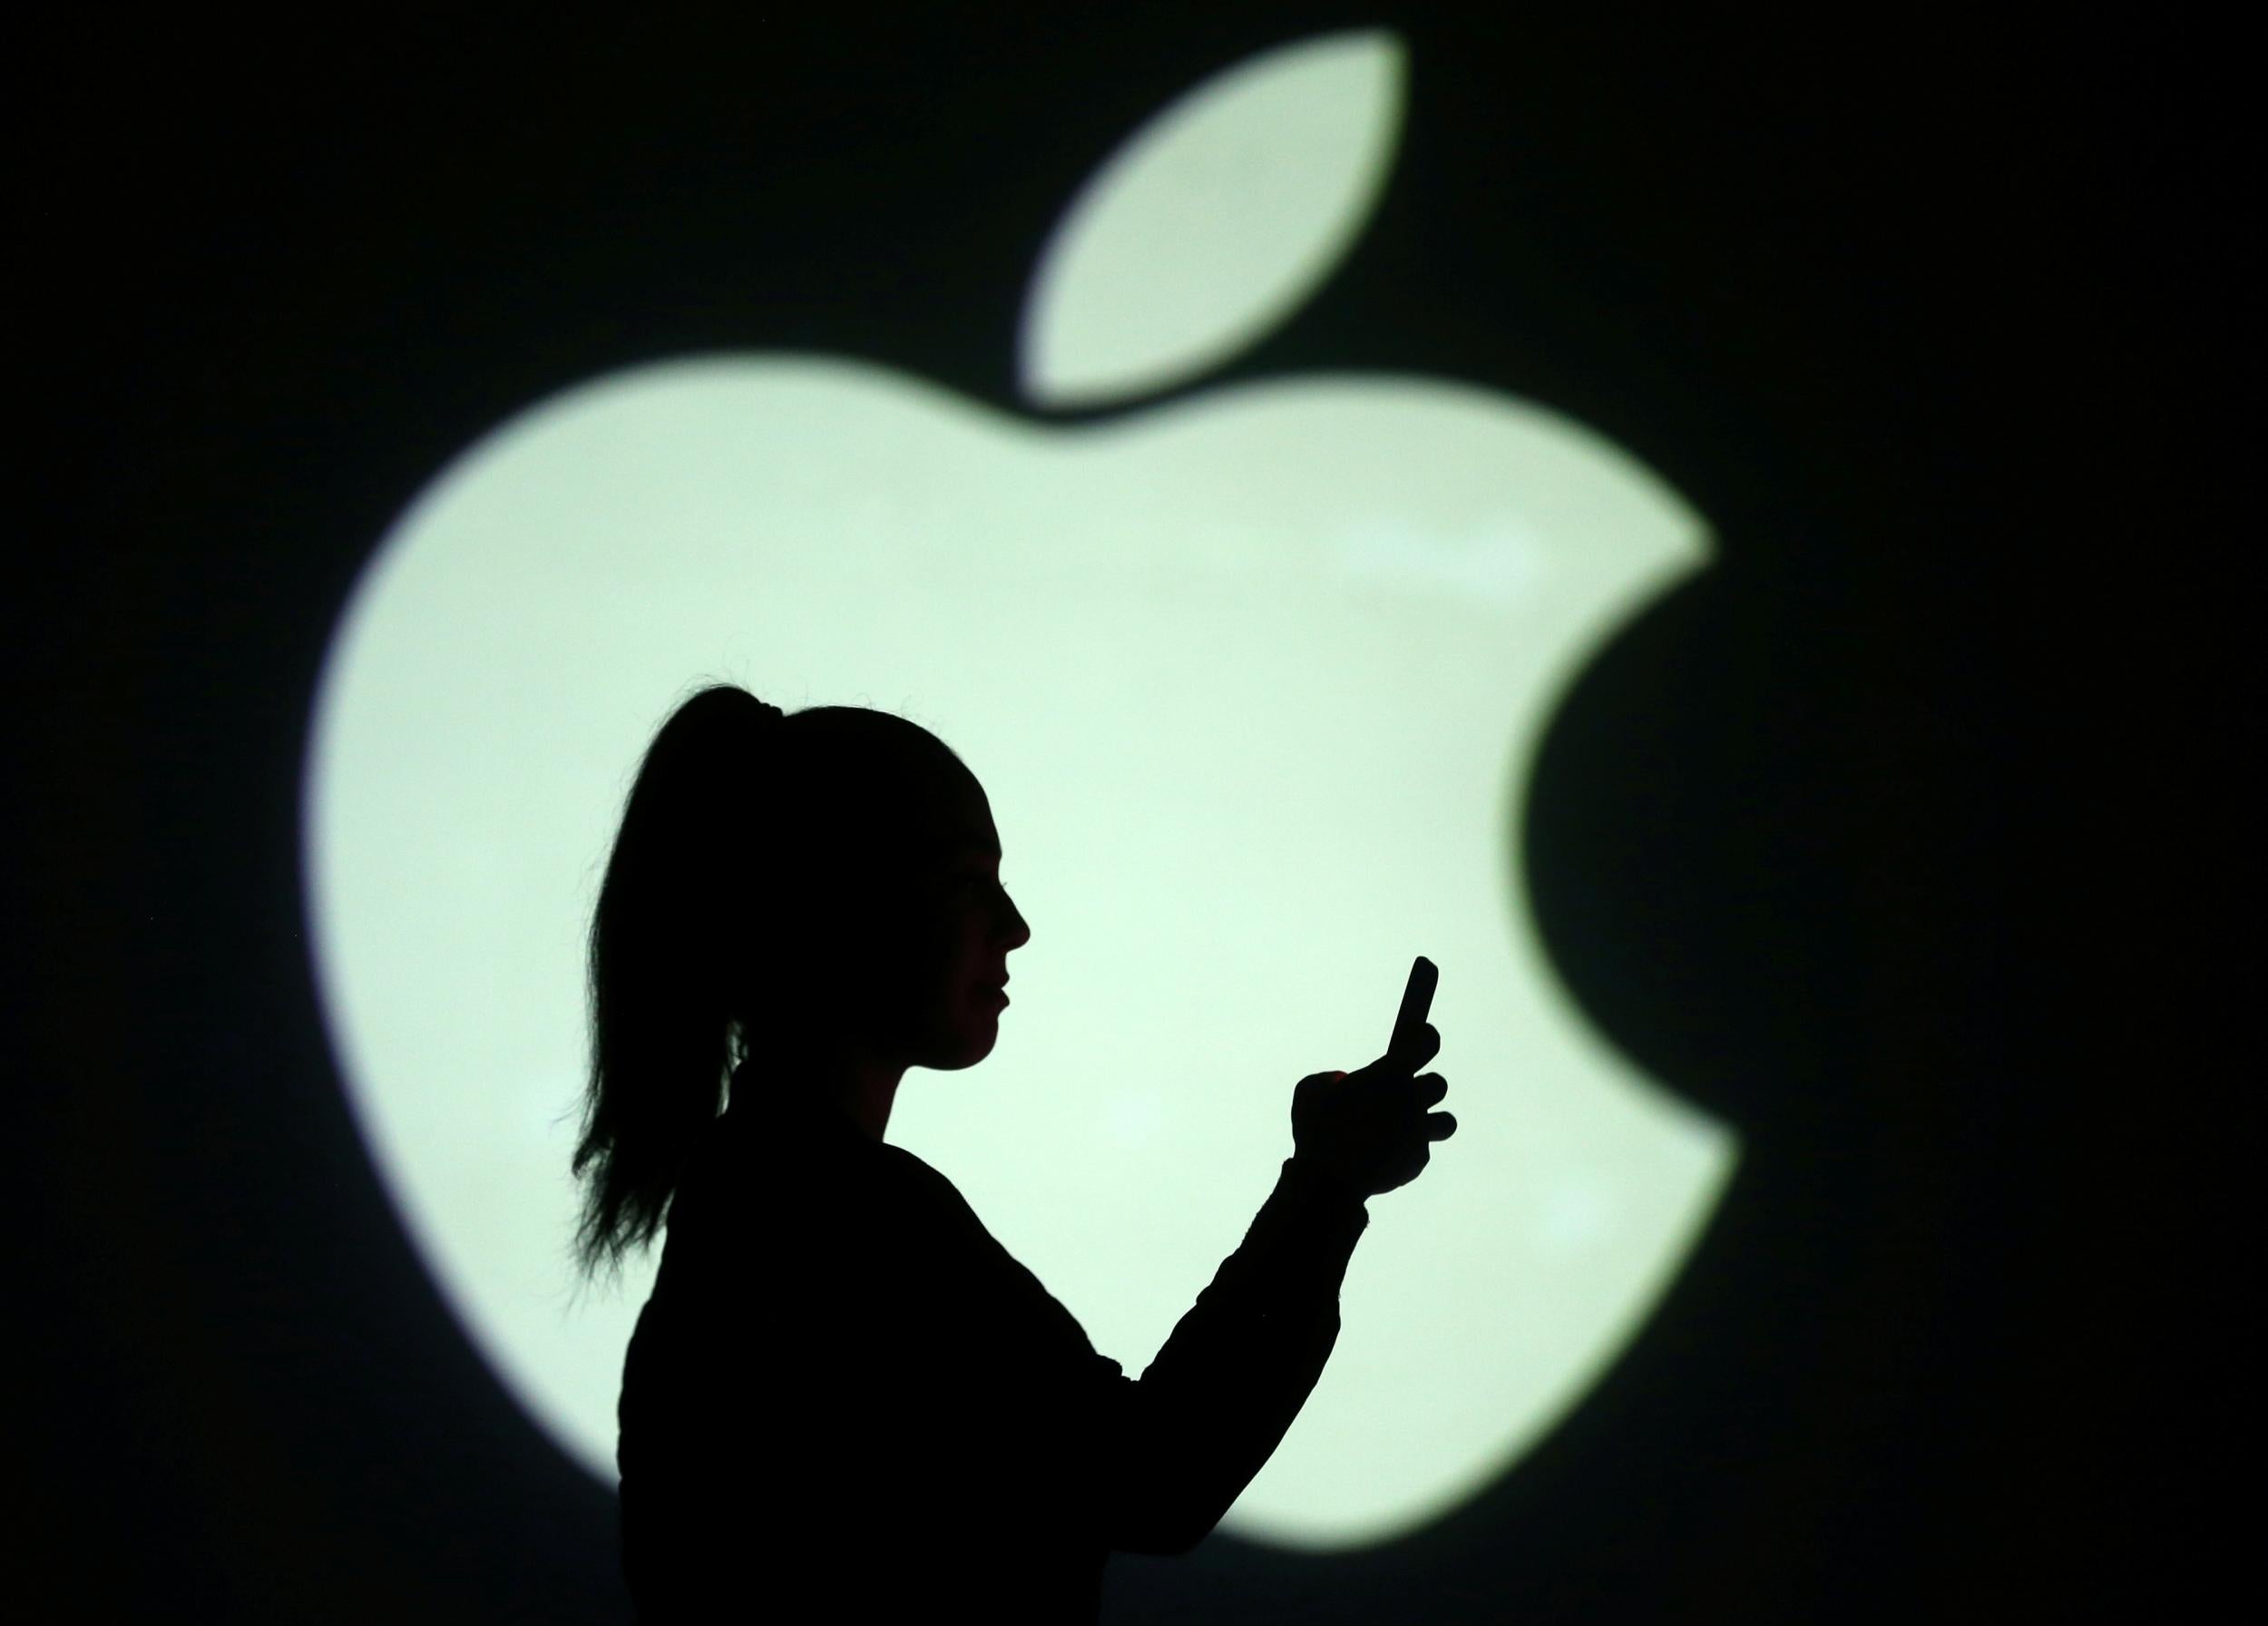 The 16-year-old hacker from Melbourne broke into Apple's mainframe several times